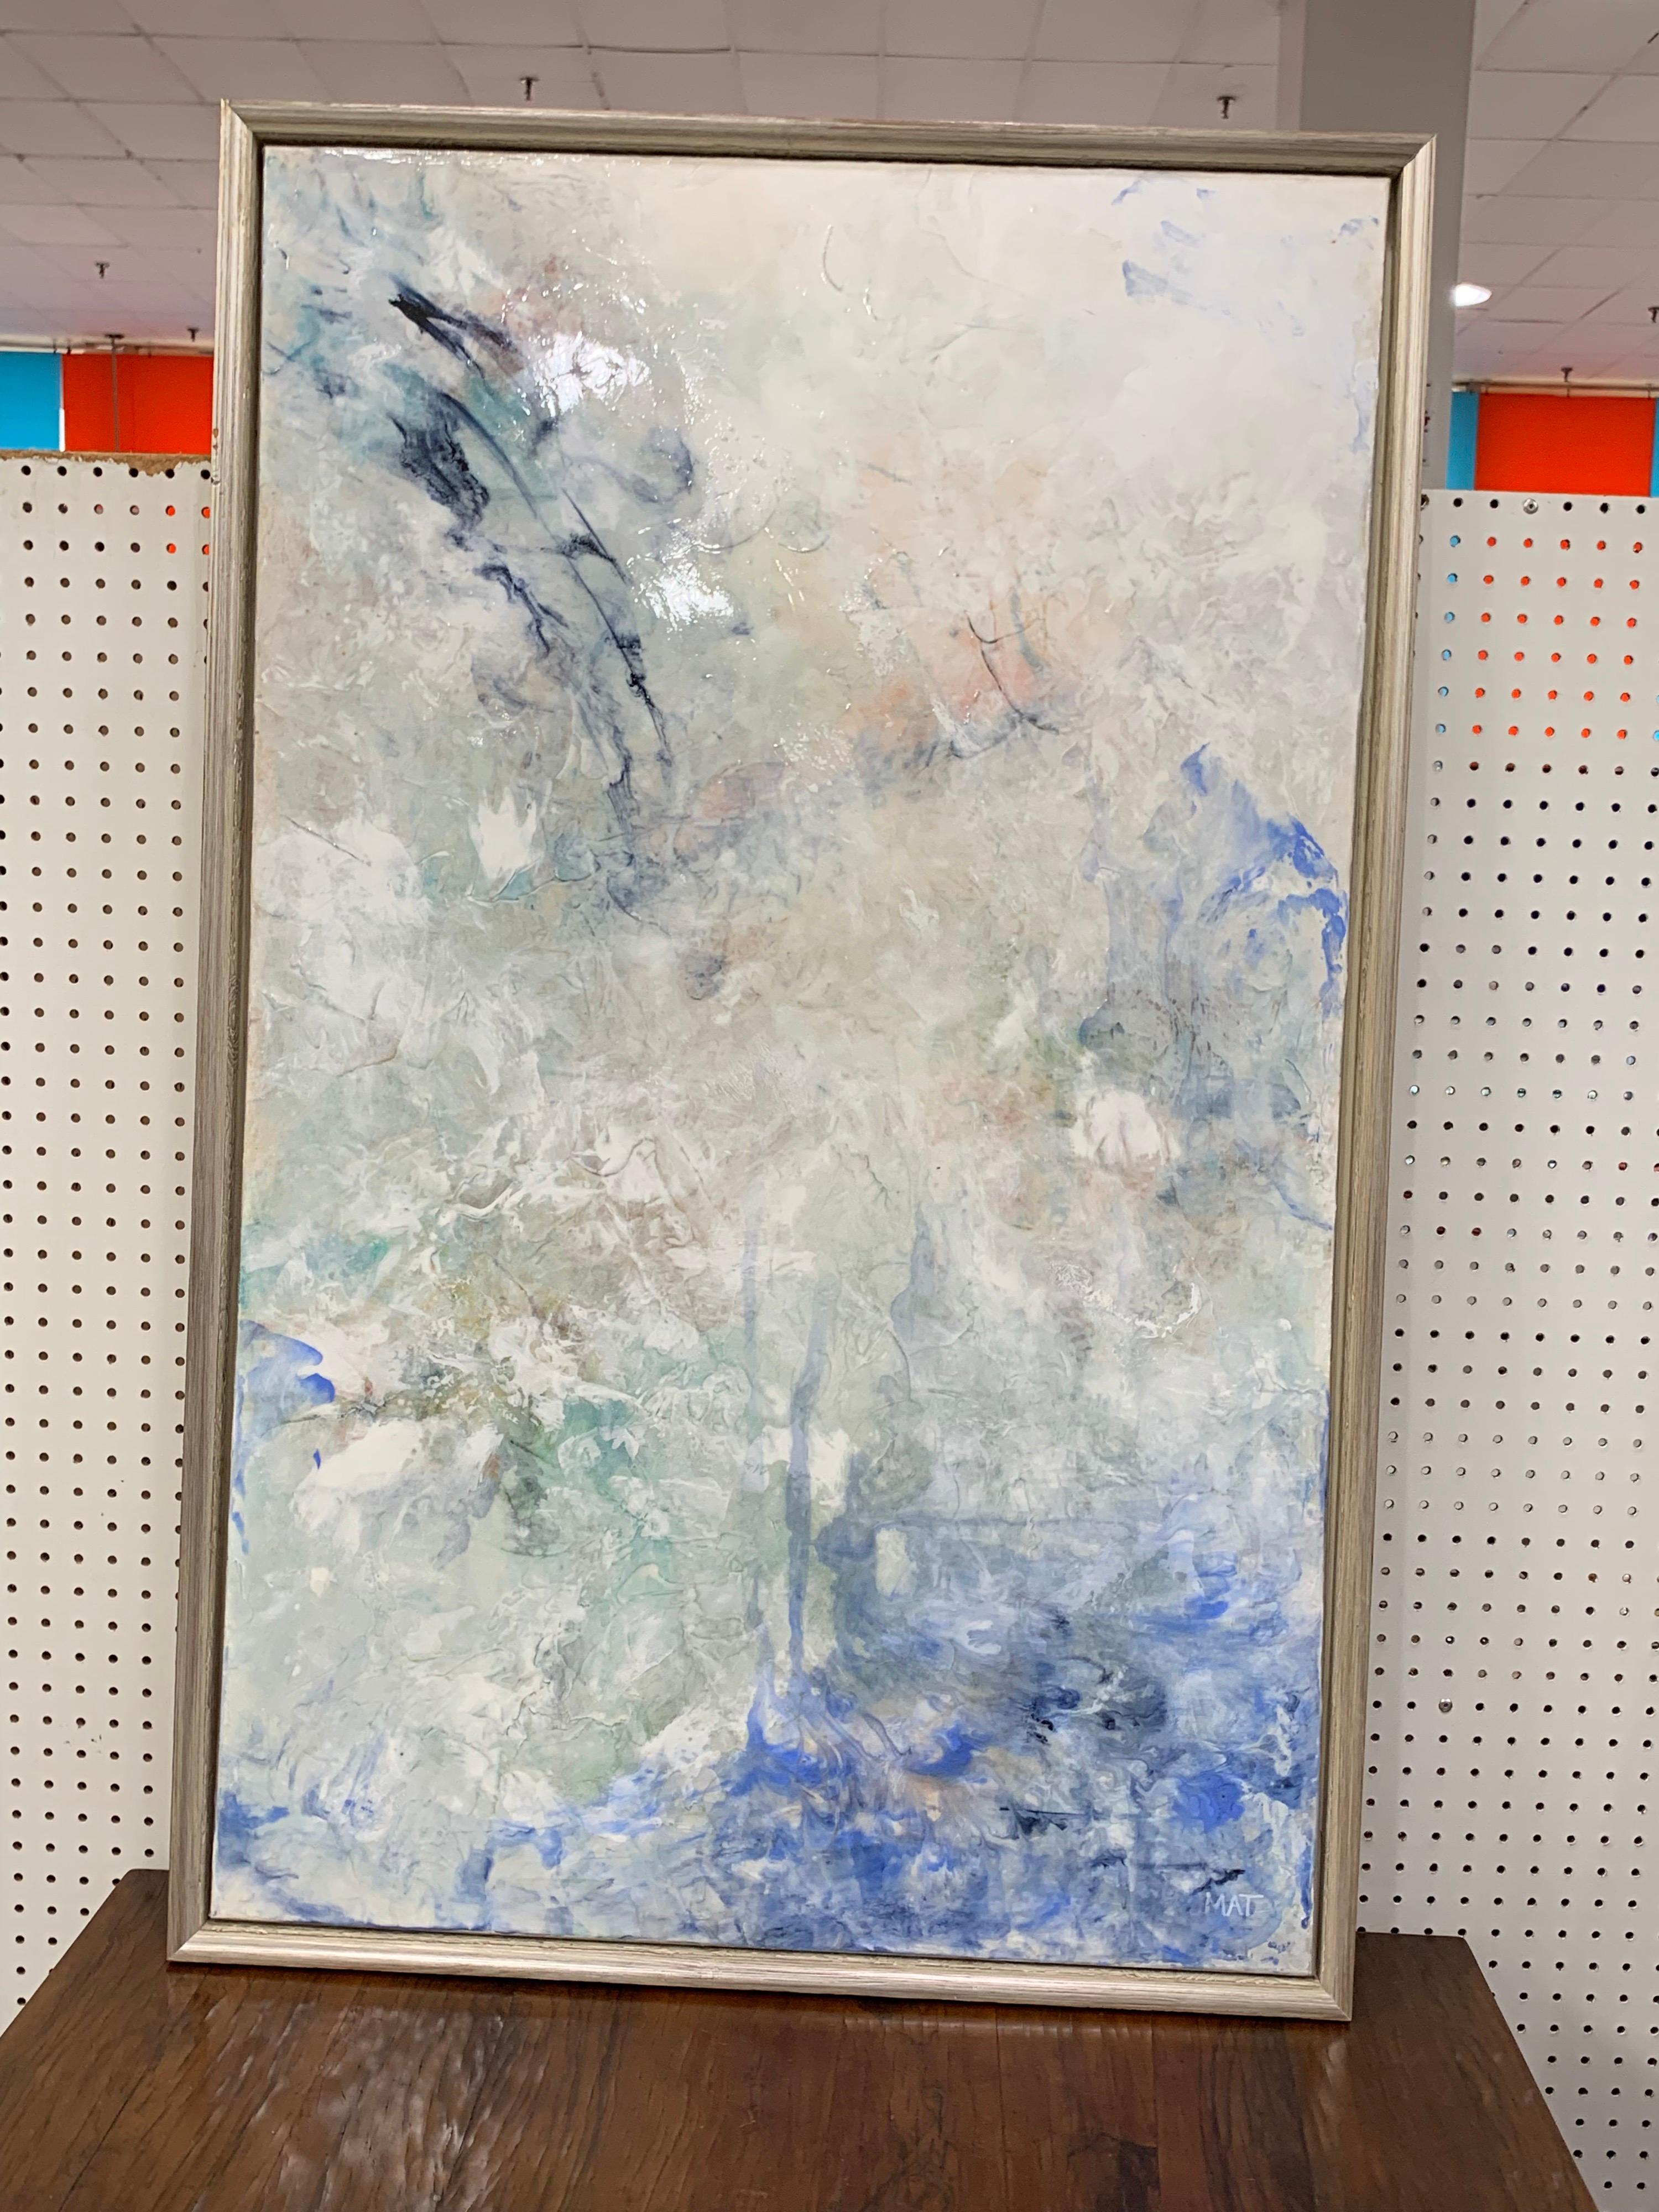 Mary Ann Taylor, a Tennessee artist, creates beautiful abstracts reflective of her life's inspiration. Her paintings celebrate the inner play of colors, harmonious washes and subtly veiled layers of rich hues across sumptuous textures.
The painting